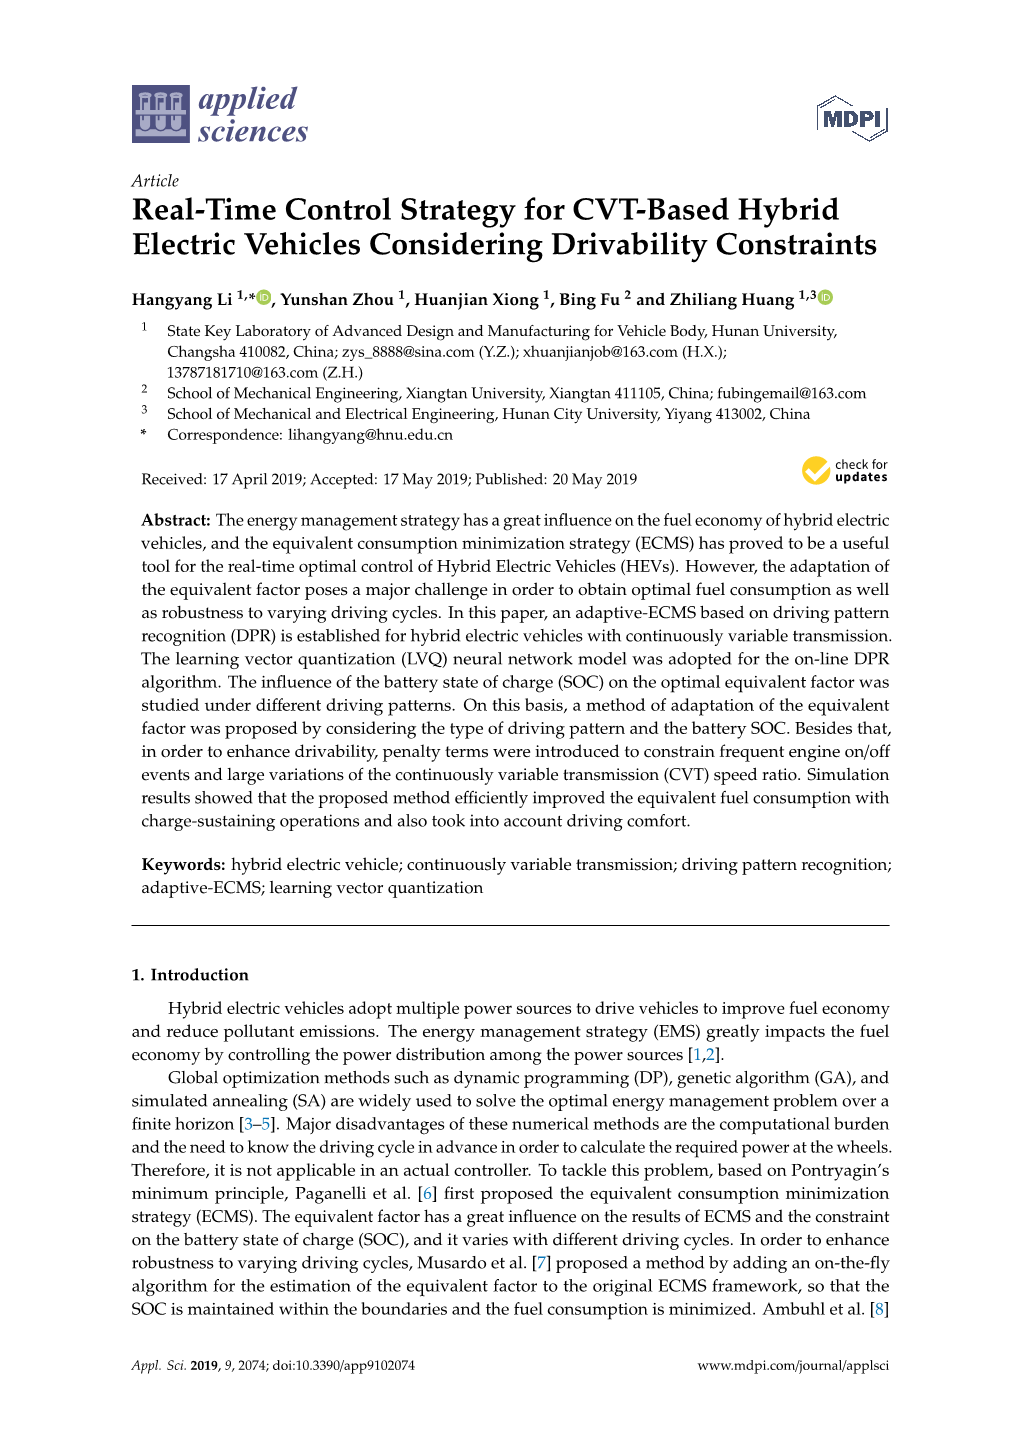 Real-Time Control Strategy for CVT-Based Hybrid Electric Vehicles Considering Drivability Constraints